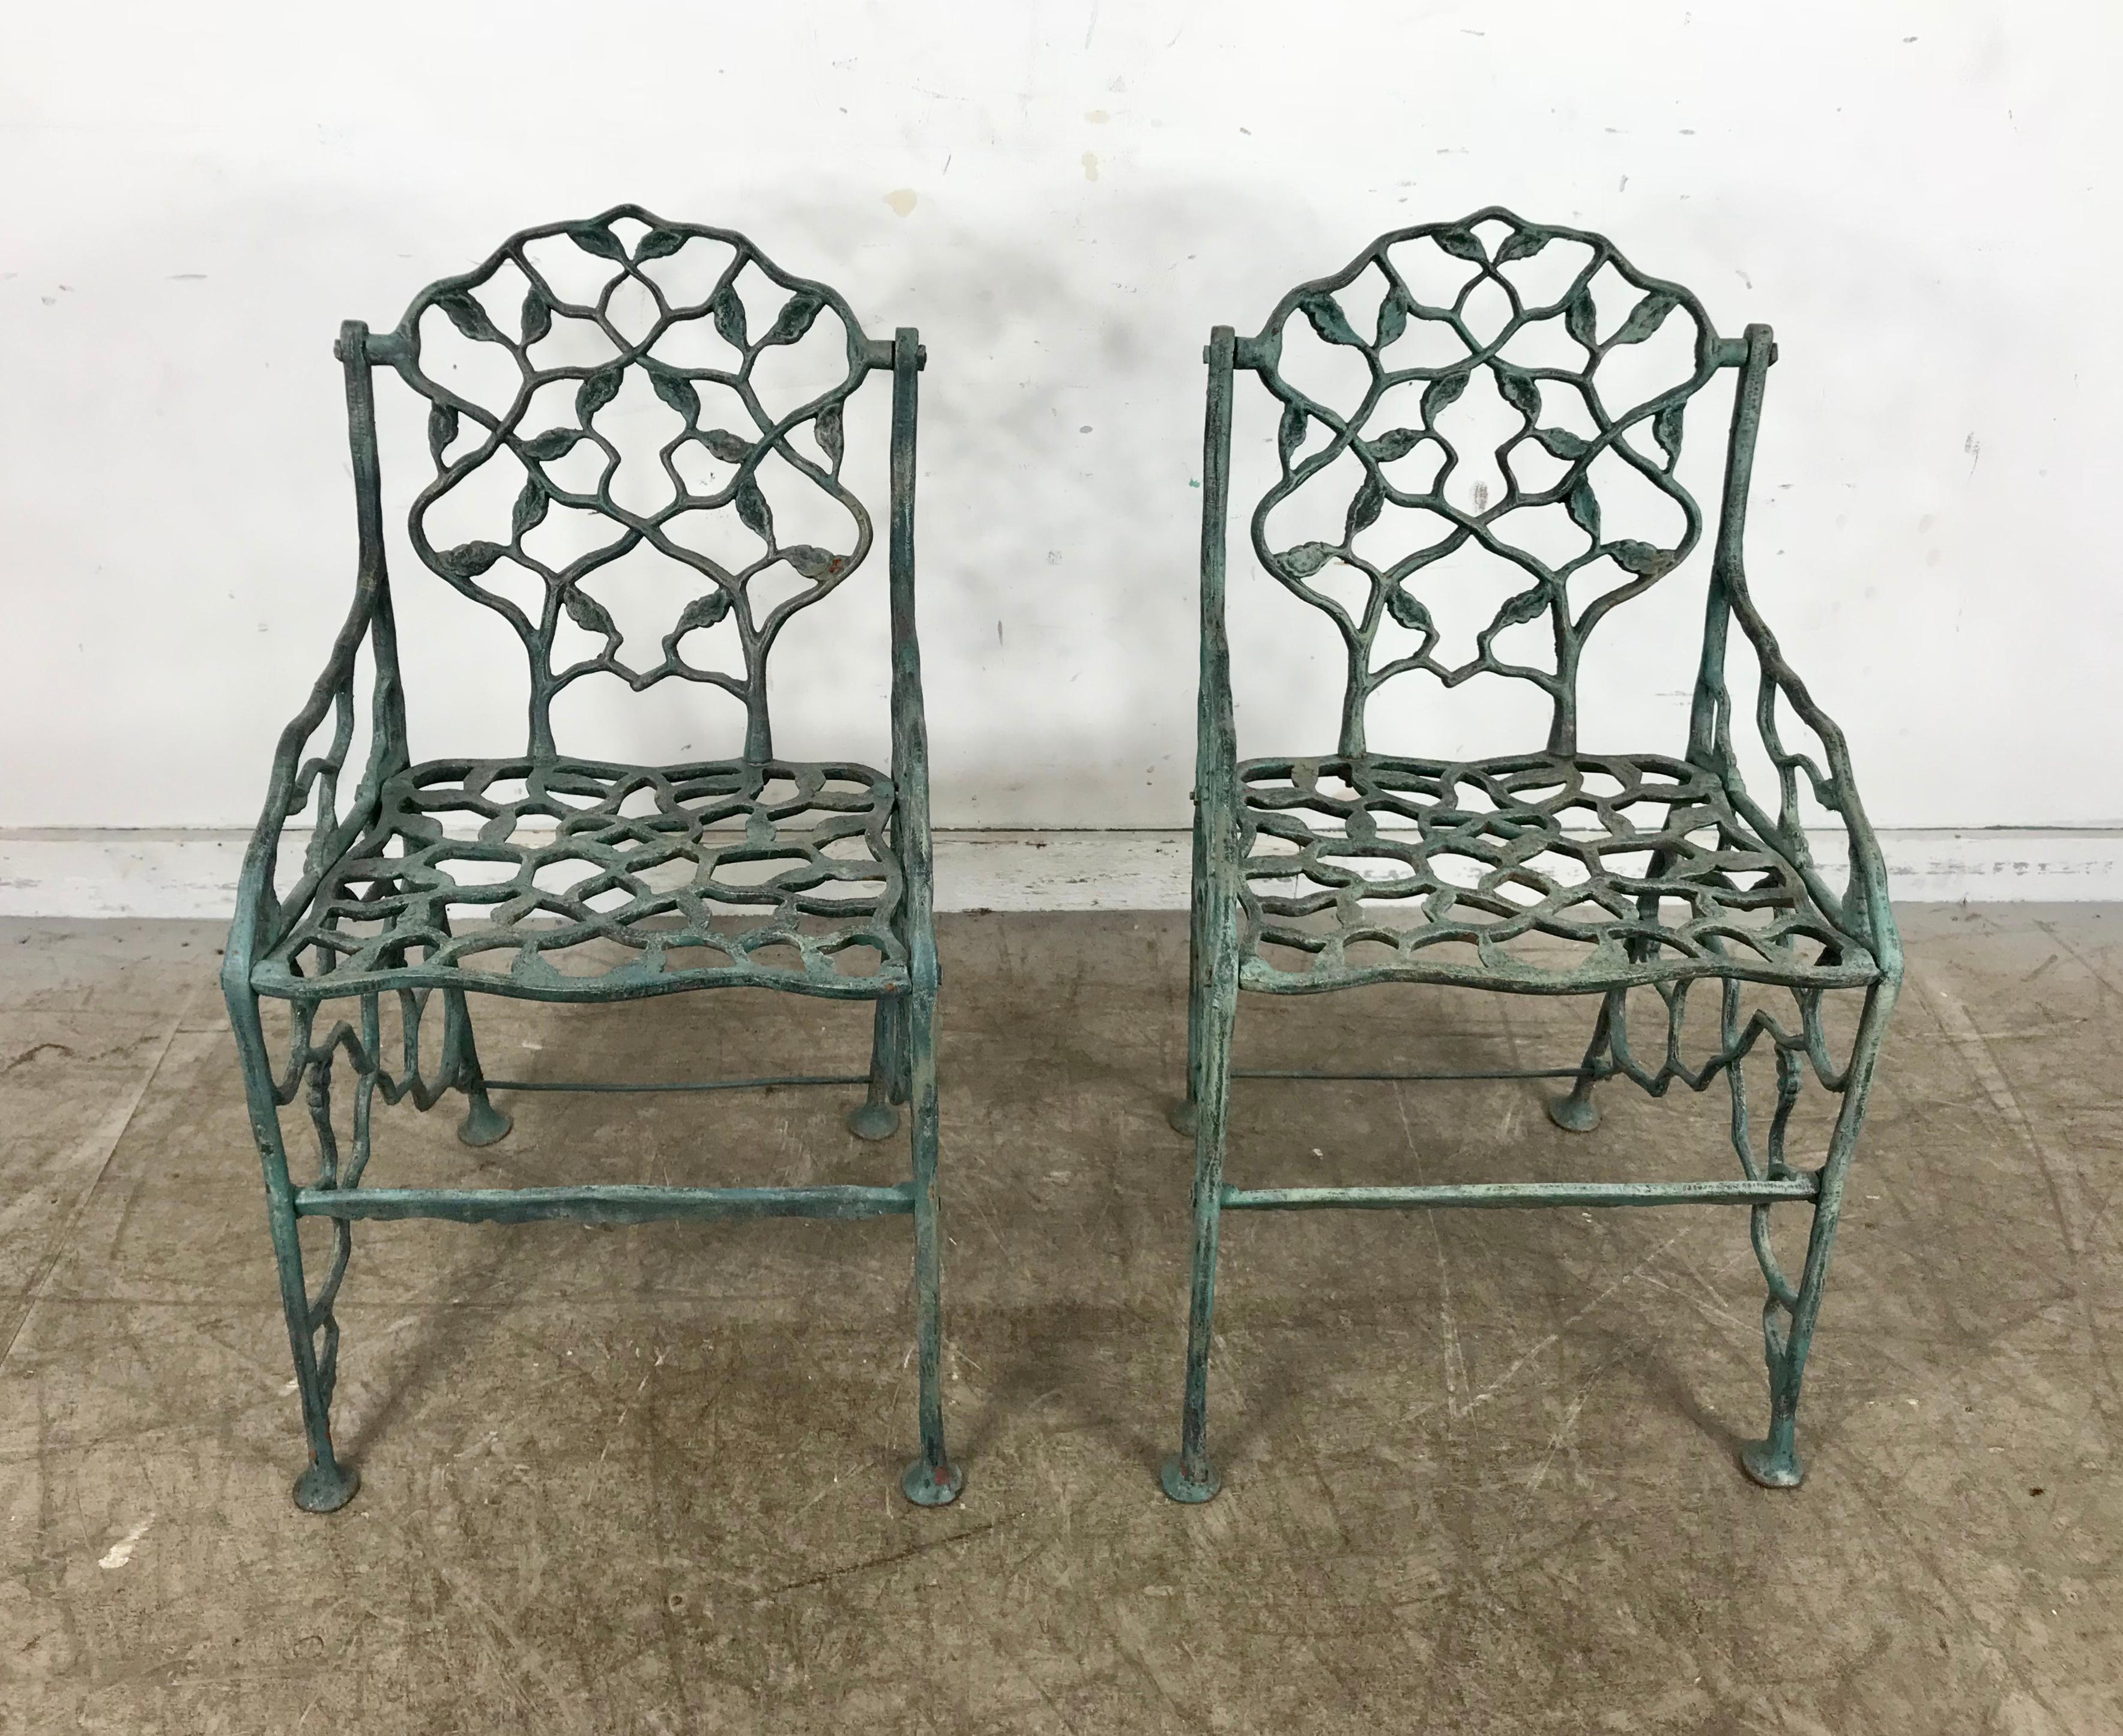 Early rustic cast iron garden chairs 